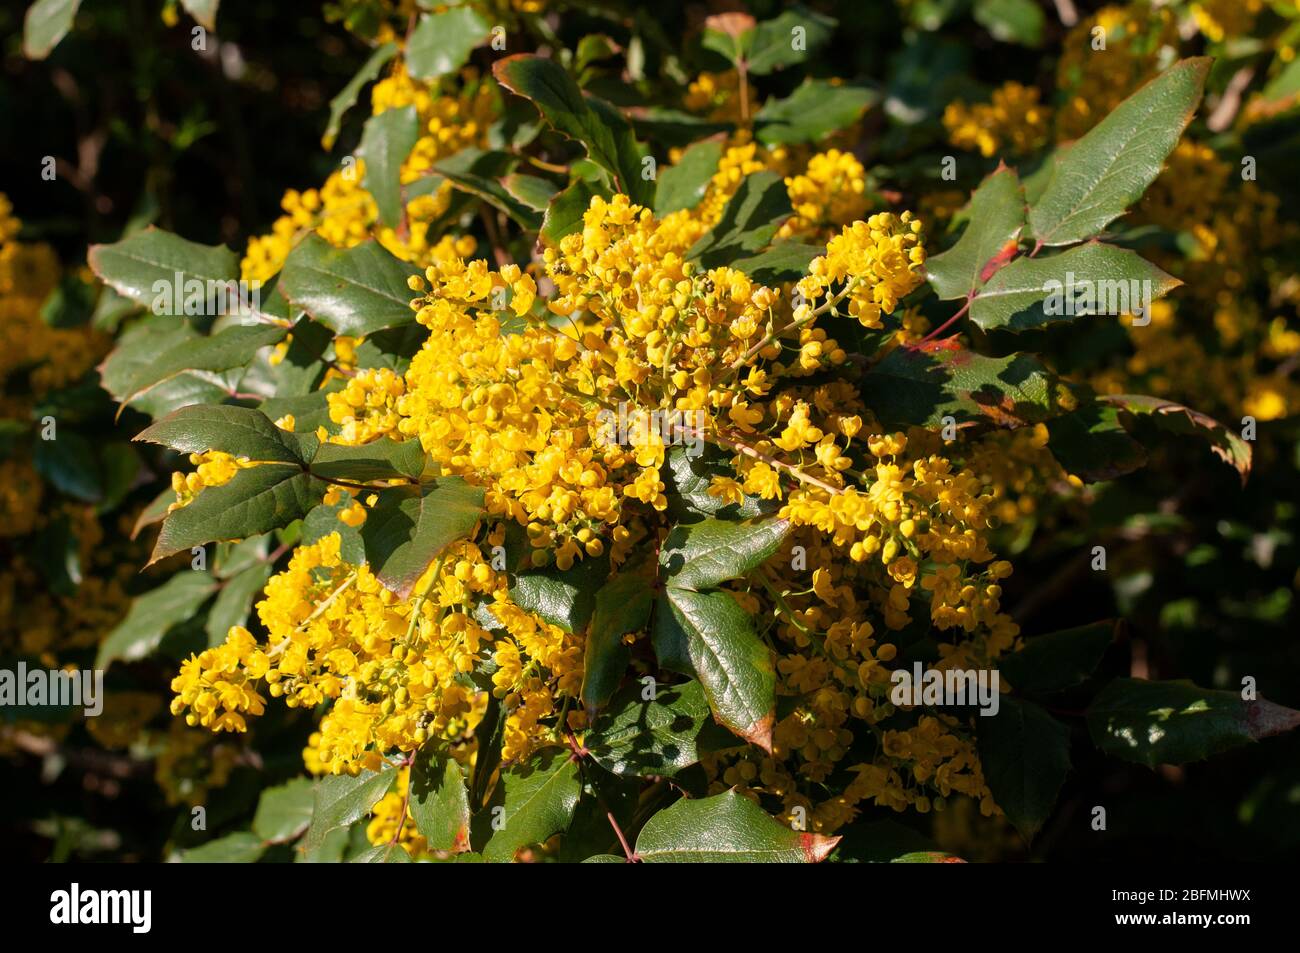 blossoms of a flowering mahonia shrub with yellow petals in sunlight Stock Photo